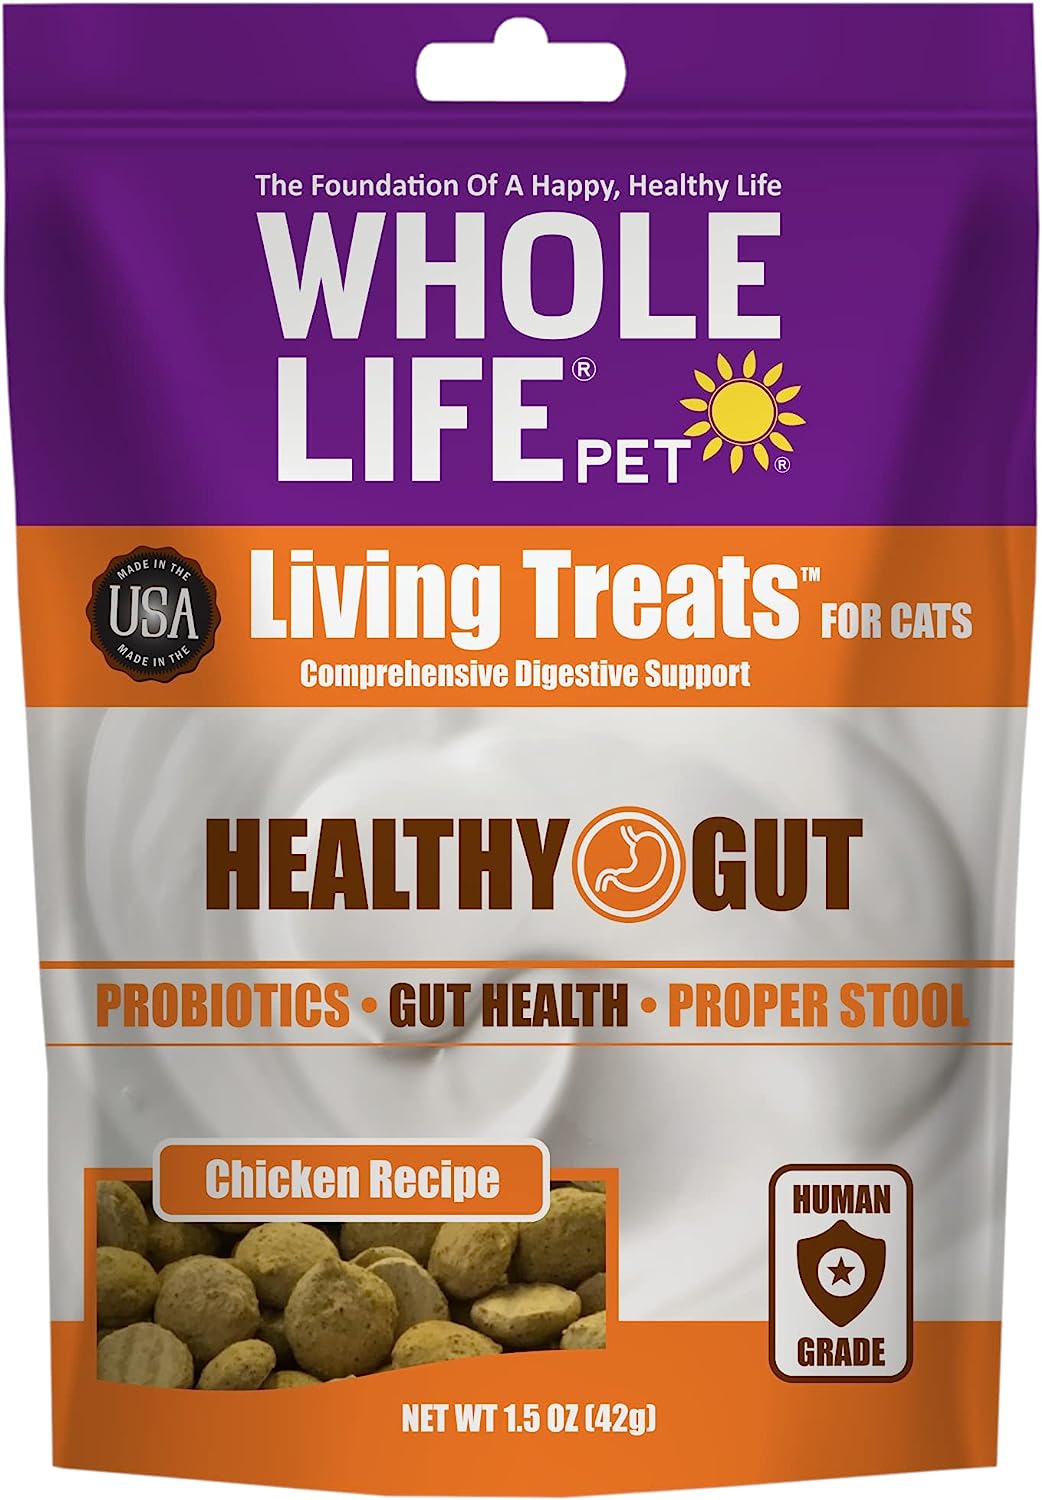 Whole Life Pet Living Treats for Cats